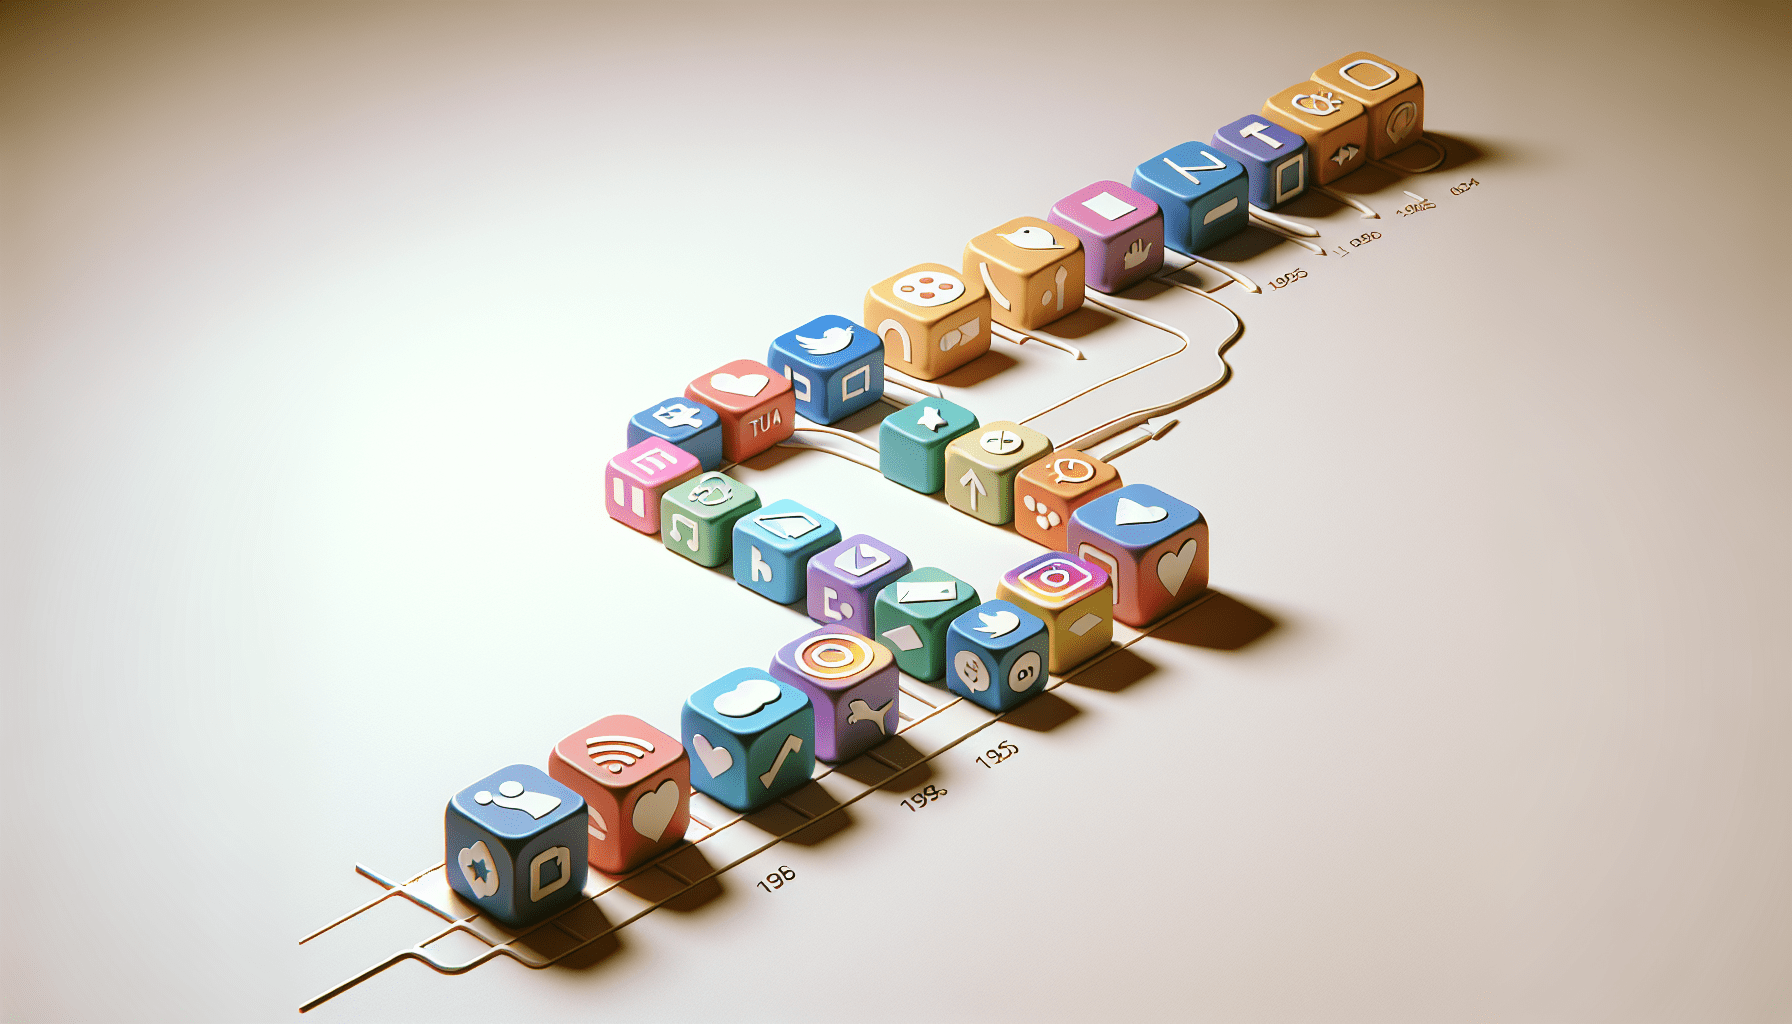 A 3D rendering of a timeline of popular social media app icons evolving over time